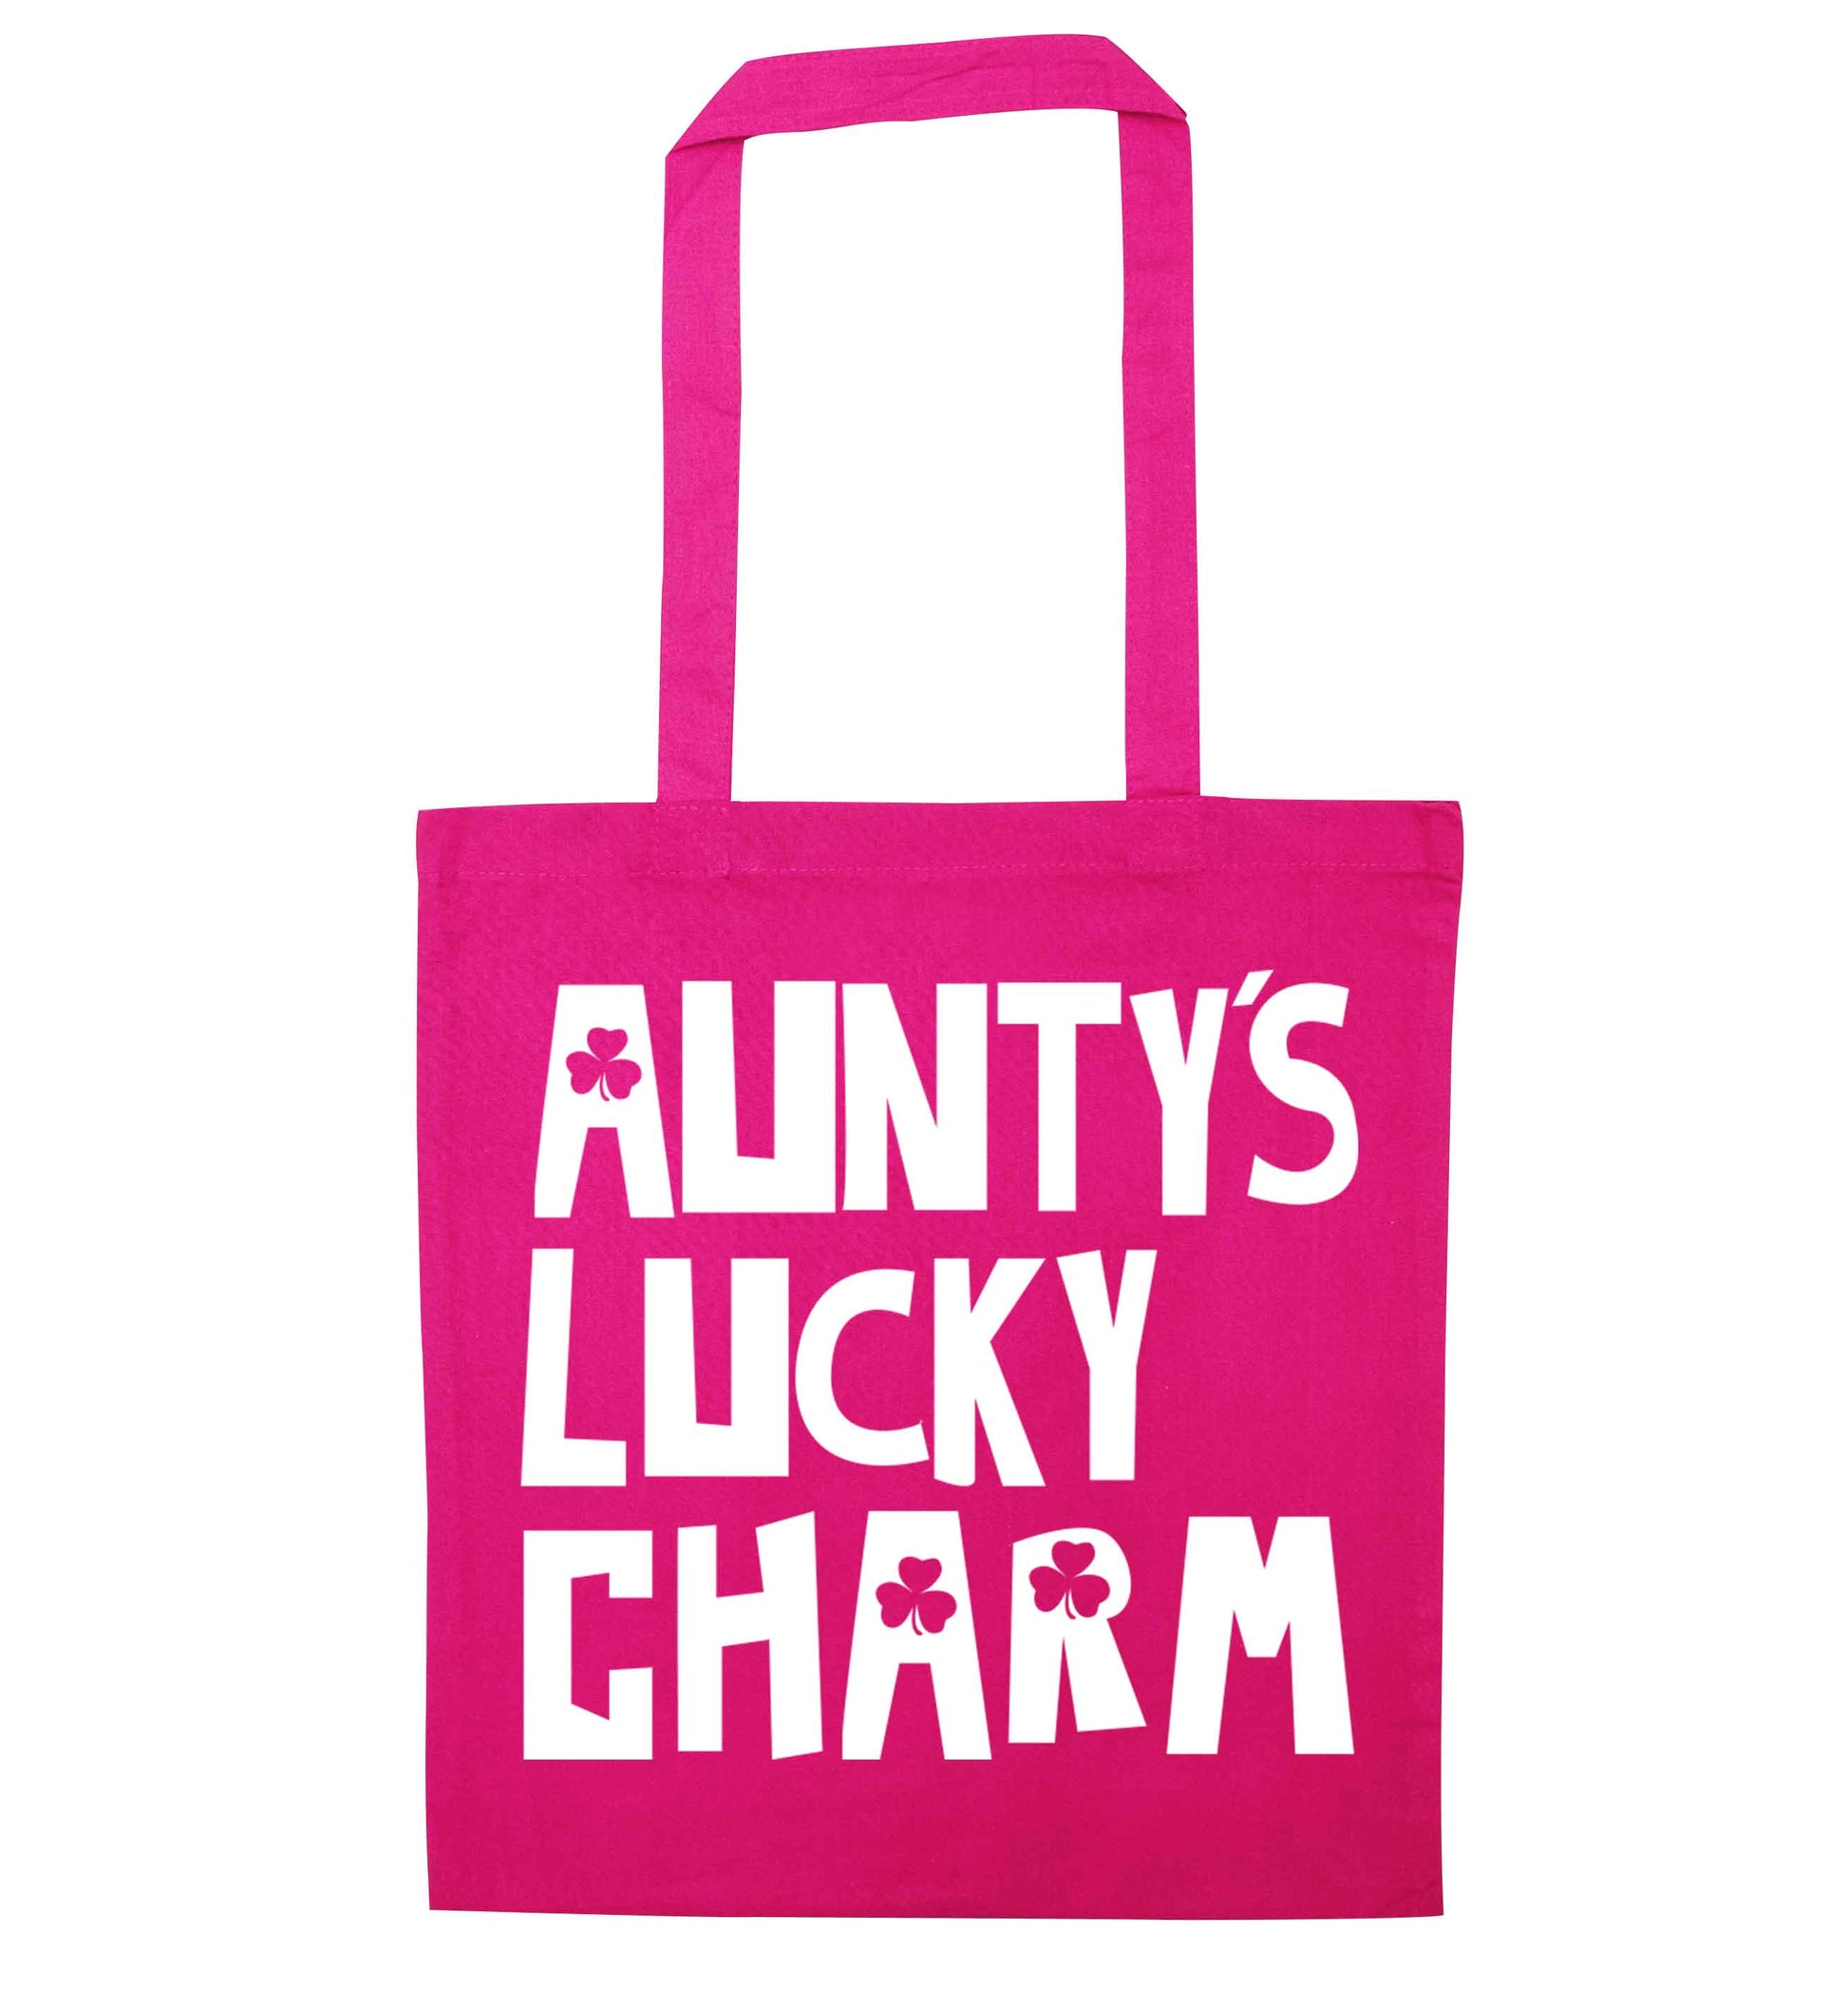 Aunty's lucky charm pink tote bag